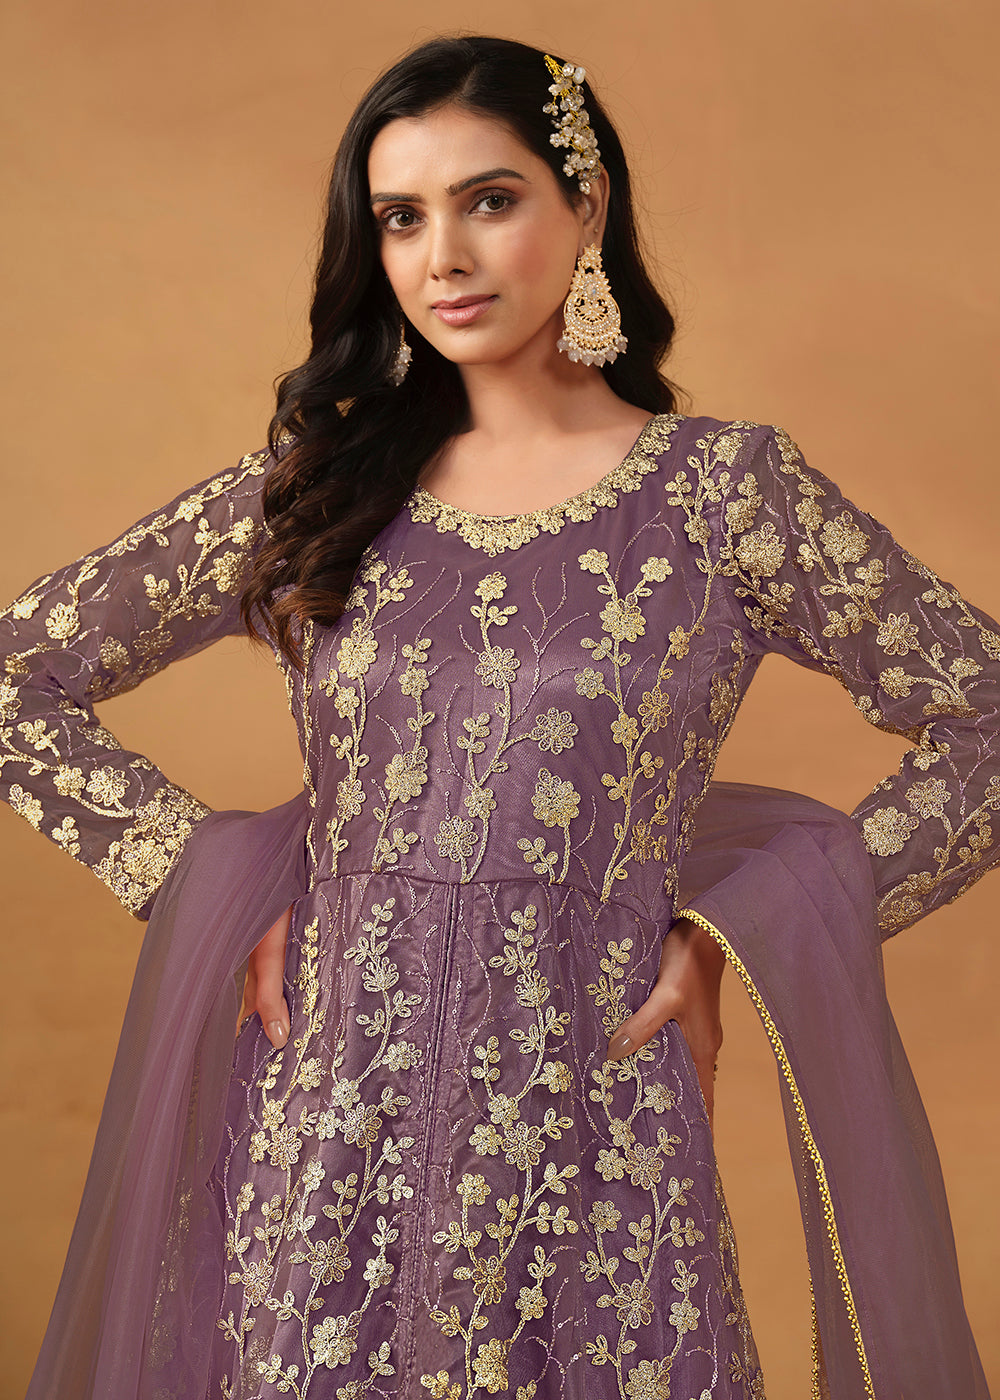 Buy Now Pant Style Purple Embroidered Net Wedding Anarkali Suit Online in USA, UK, Australia, New Zealand, Canada & Worldwide at Empress Clothing.